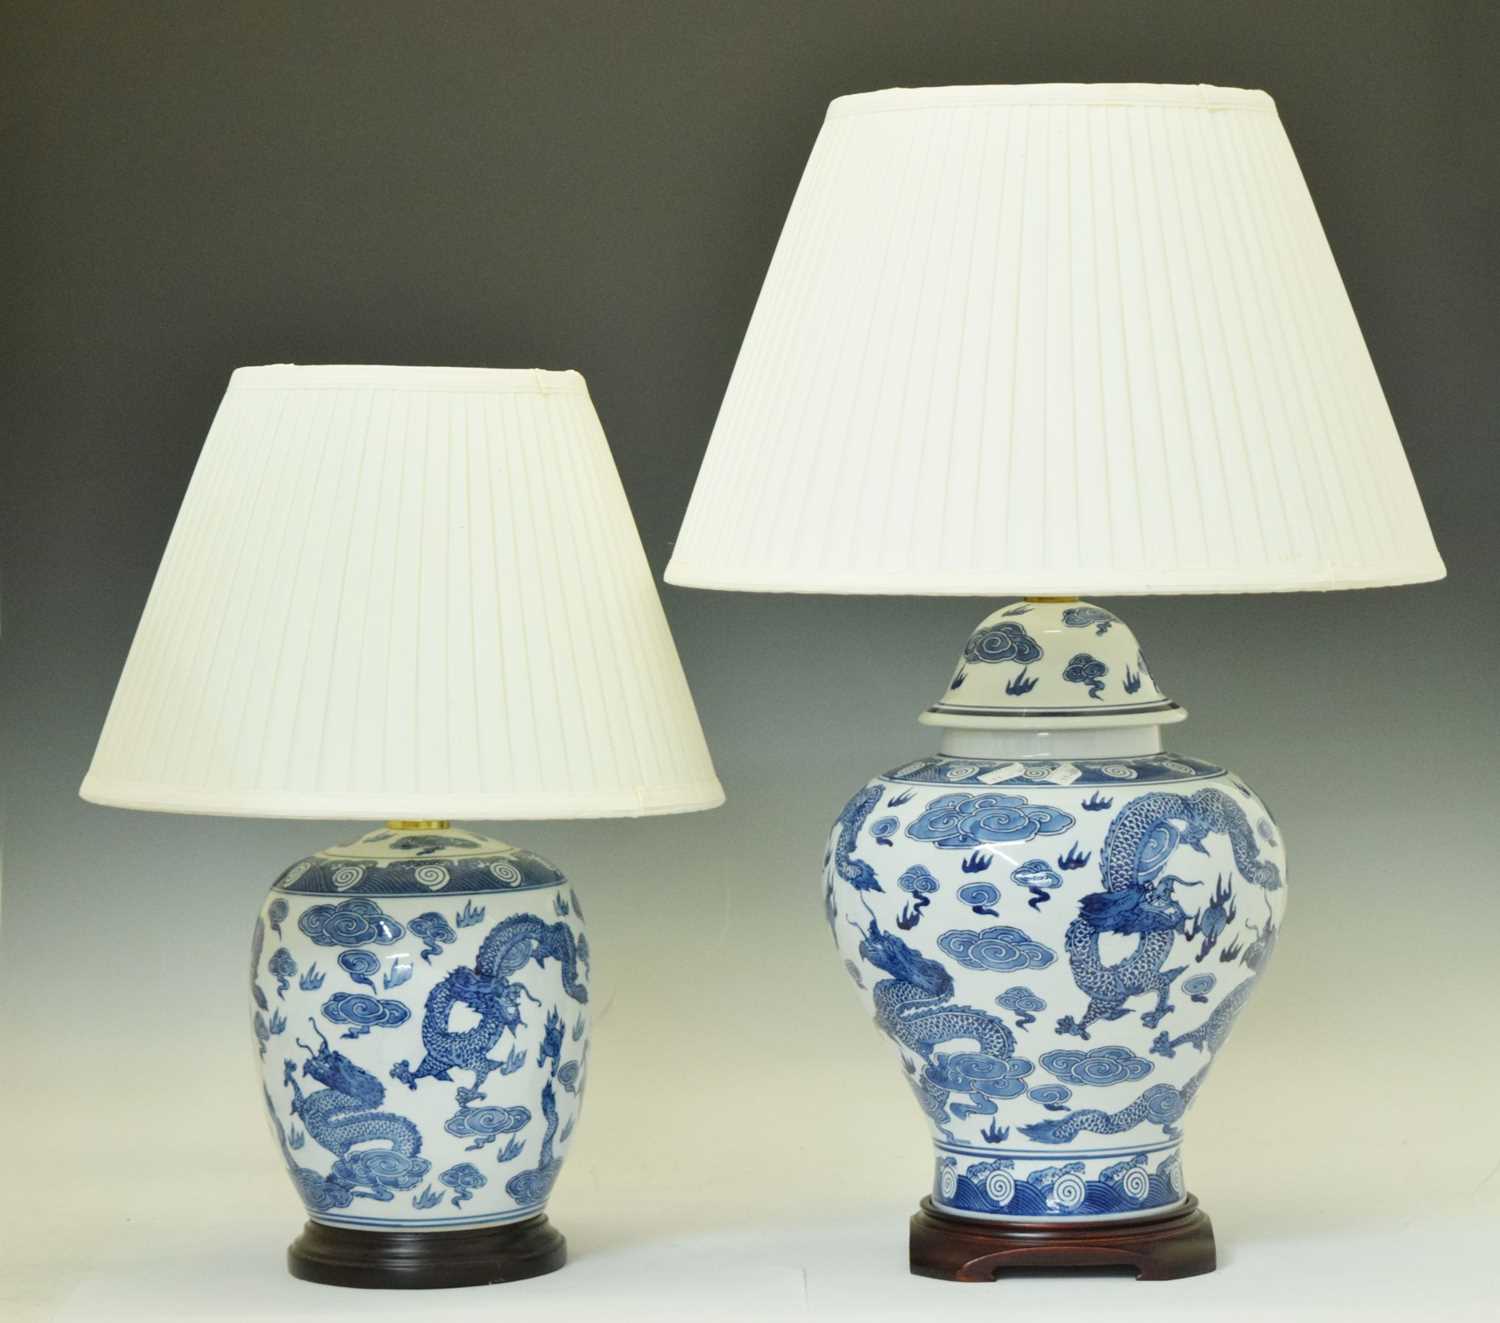 Two blue and white porcelain table lamps